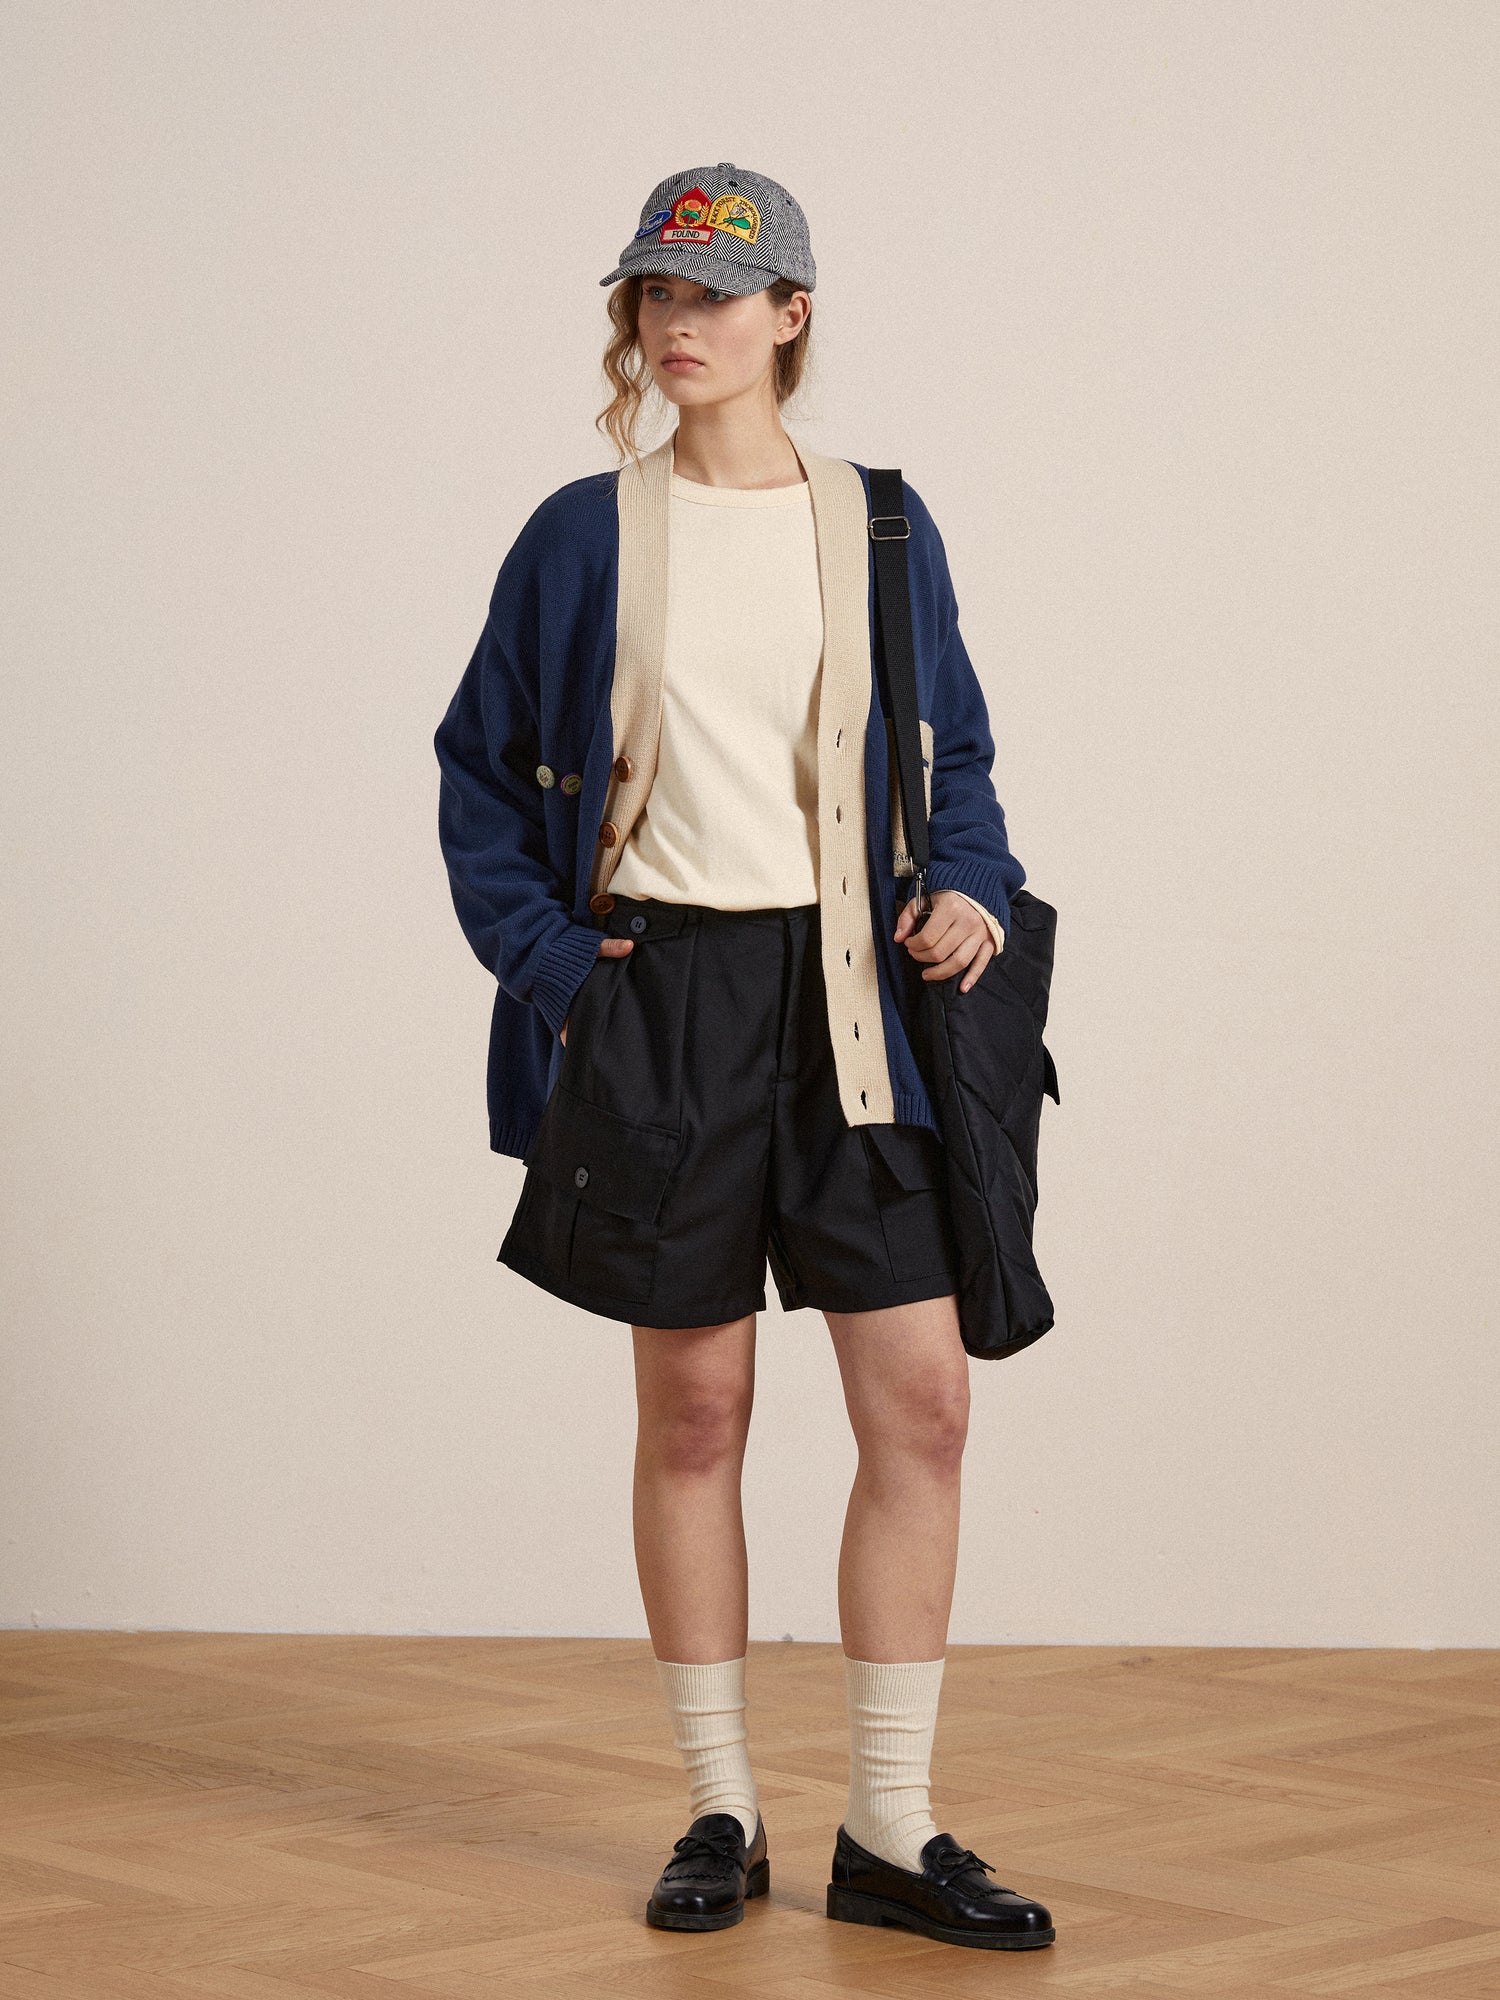 A woman wearing a hat and a Found Laleh Varsity Contrast Cardigan, showcasing a customizable look.